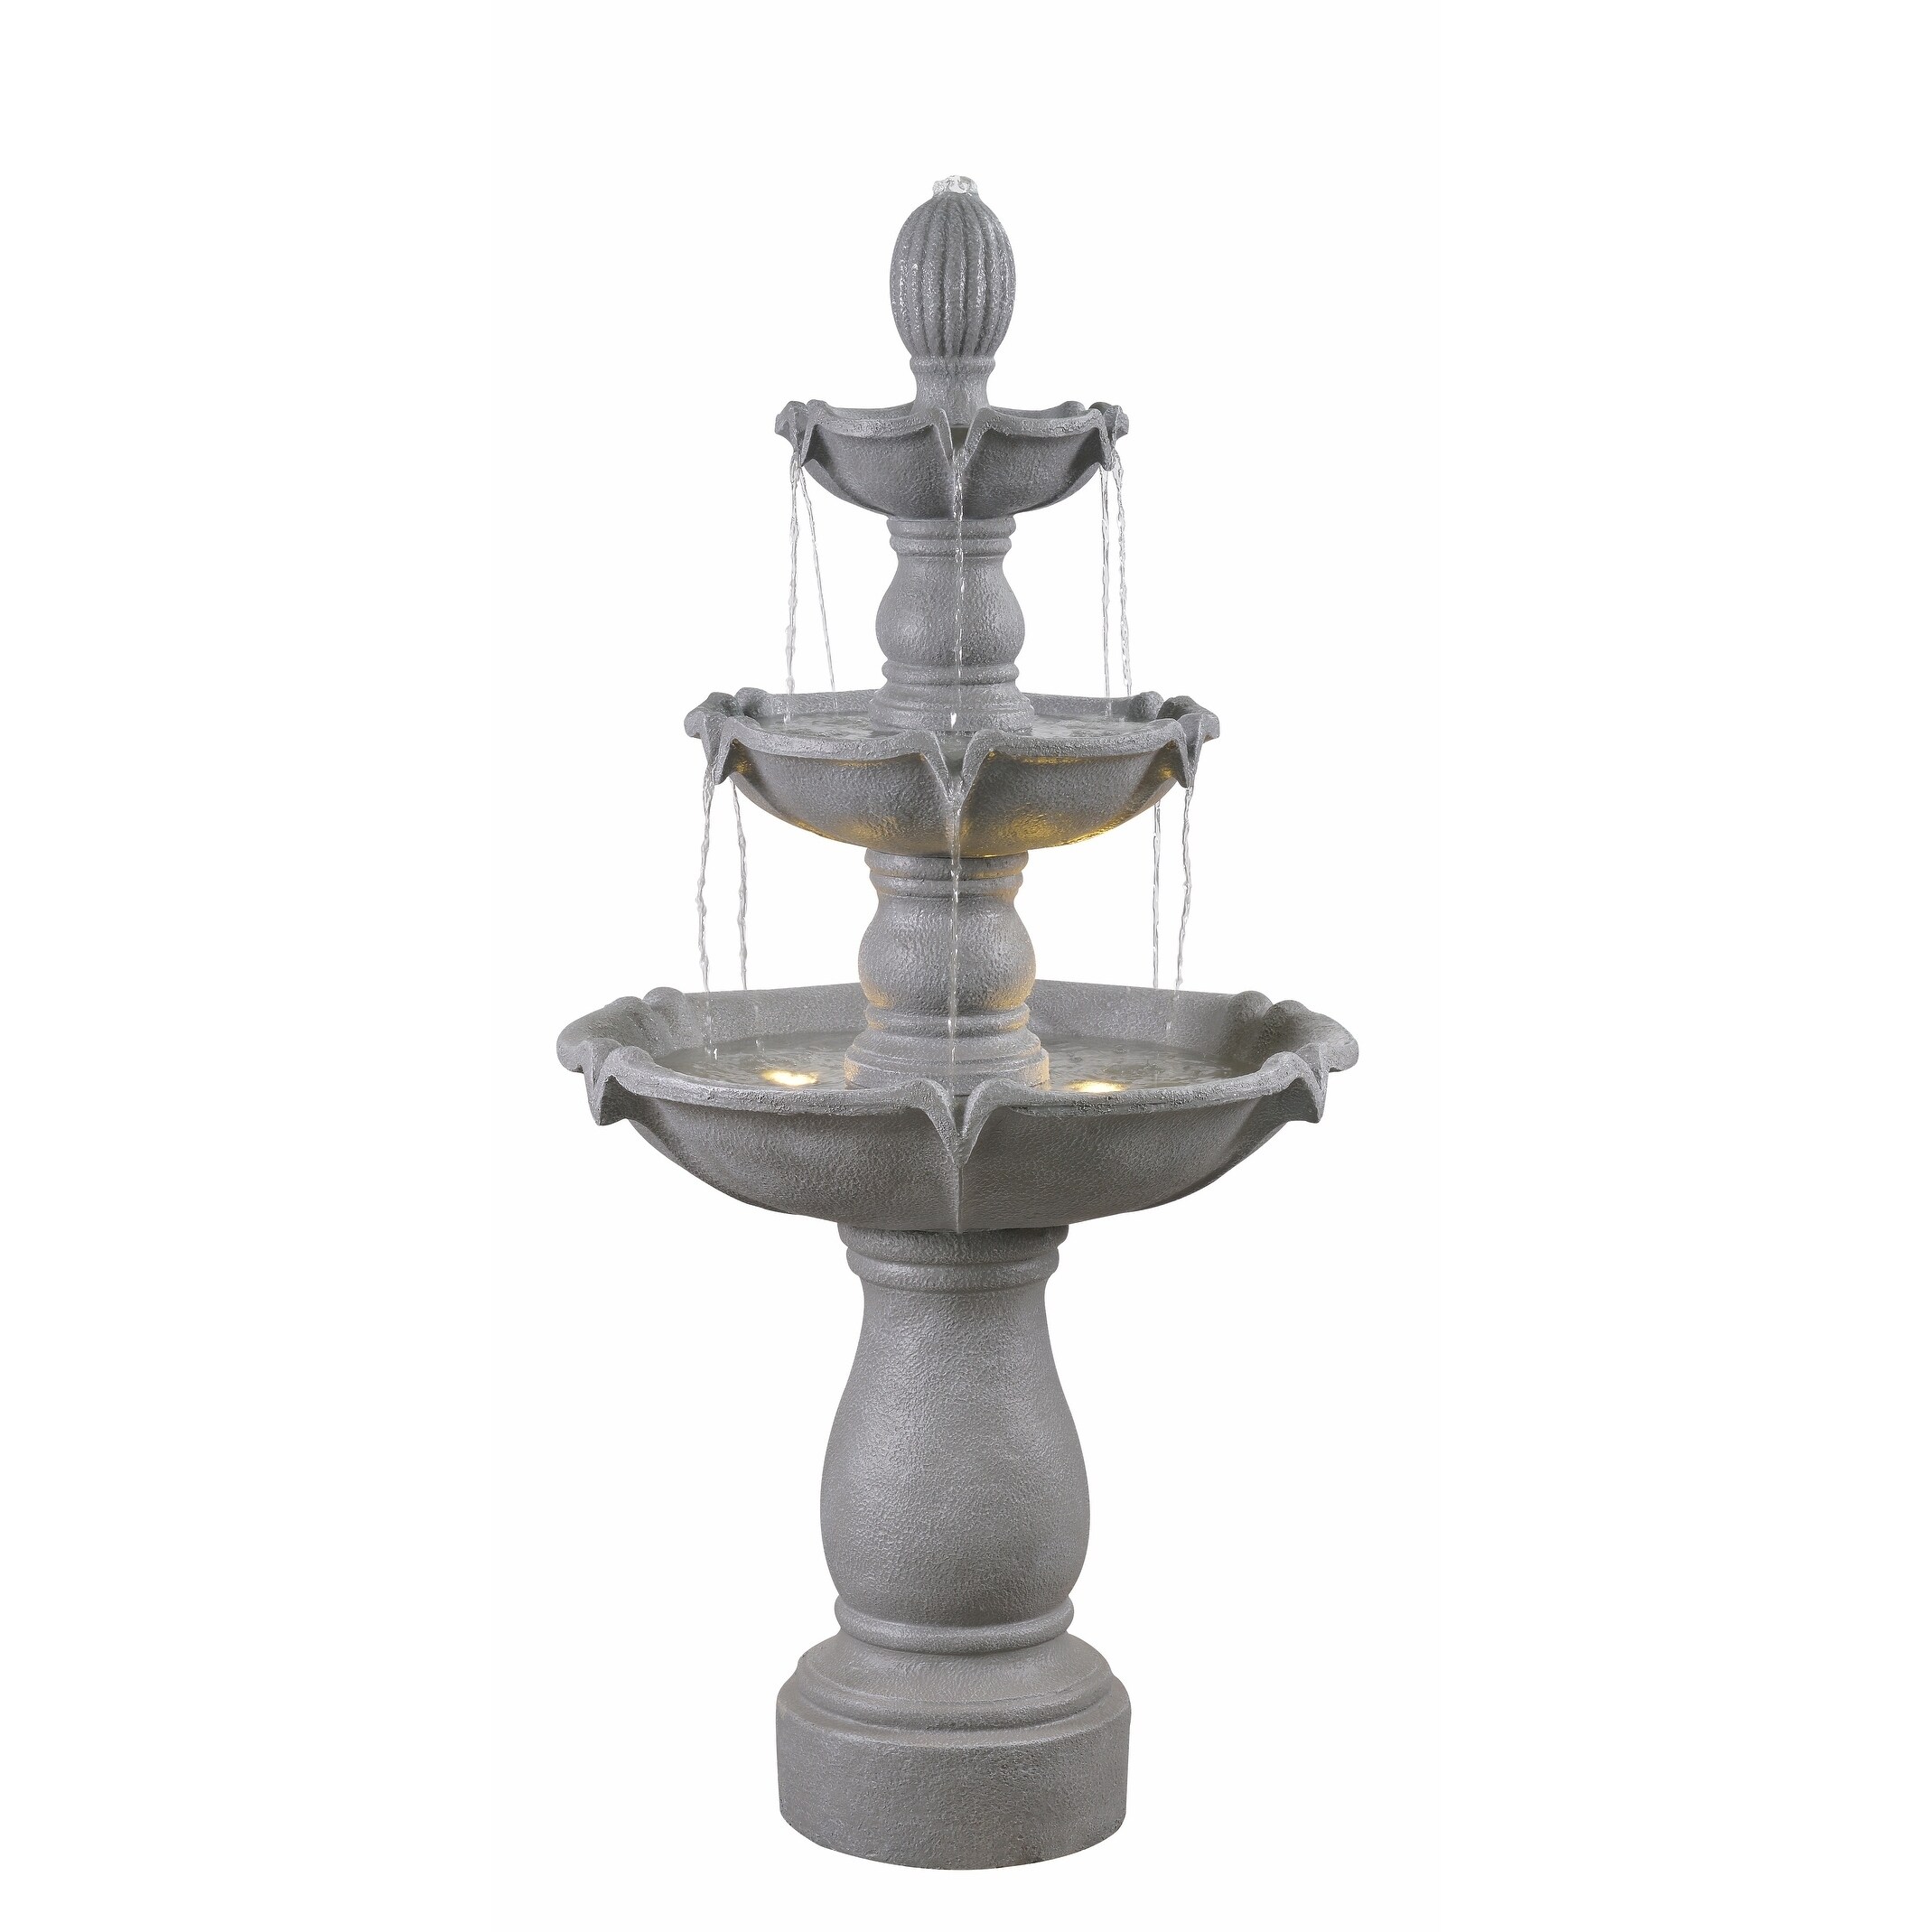 buy traditional outdoor fountains online at overstock | our best